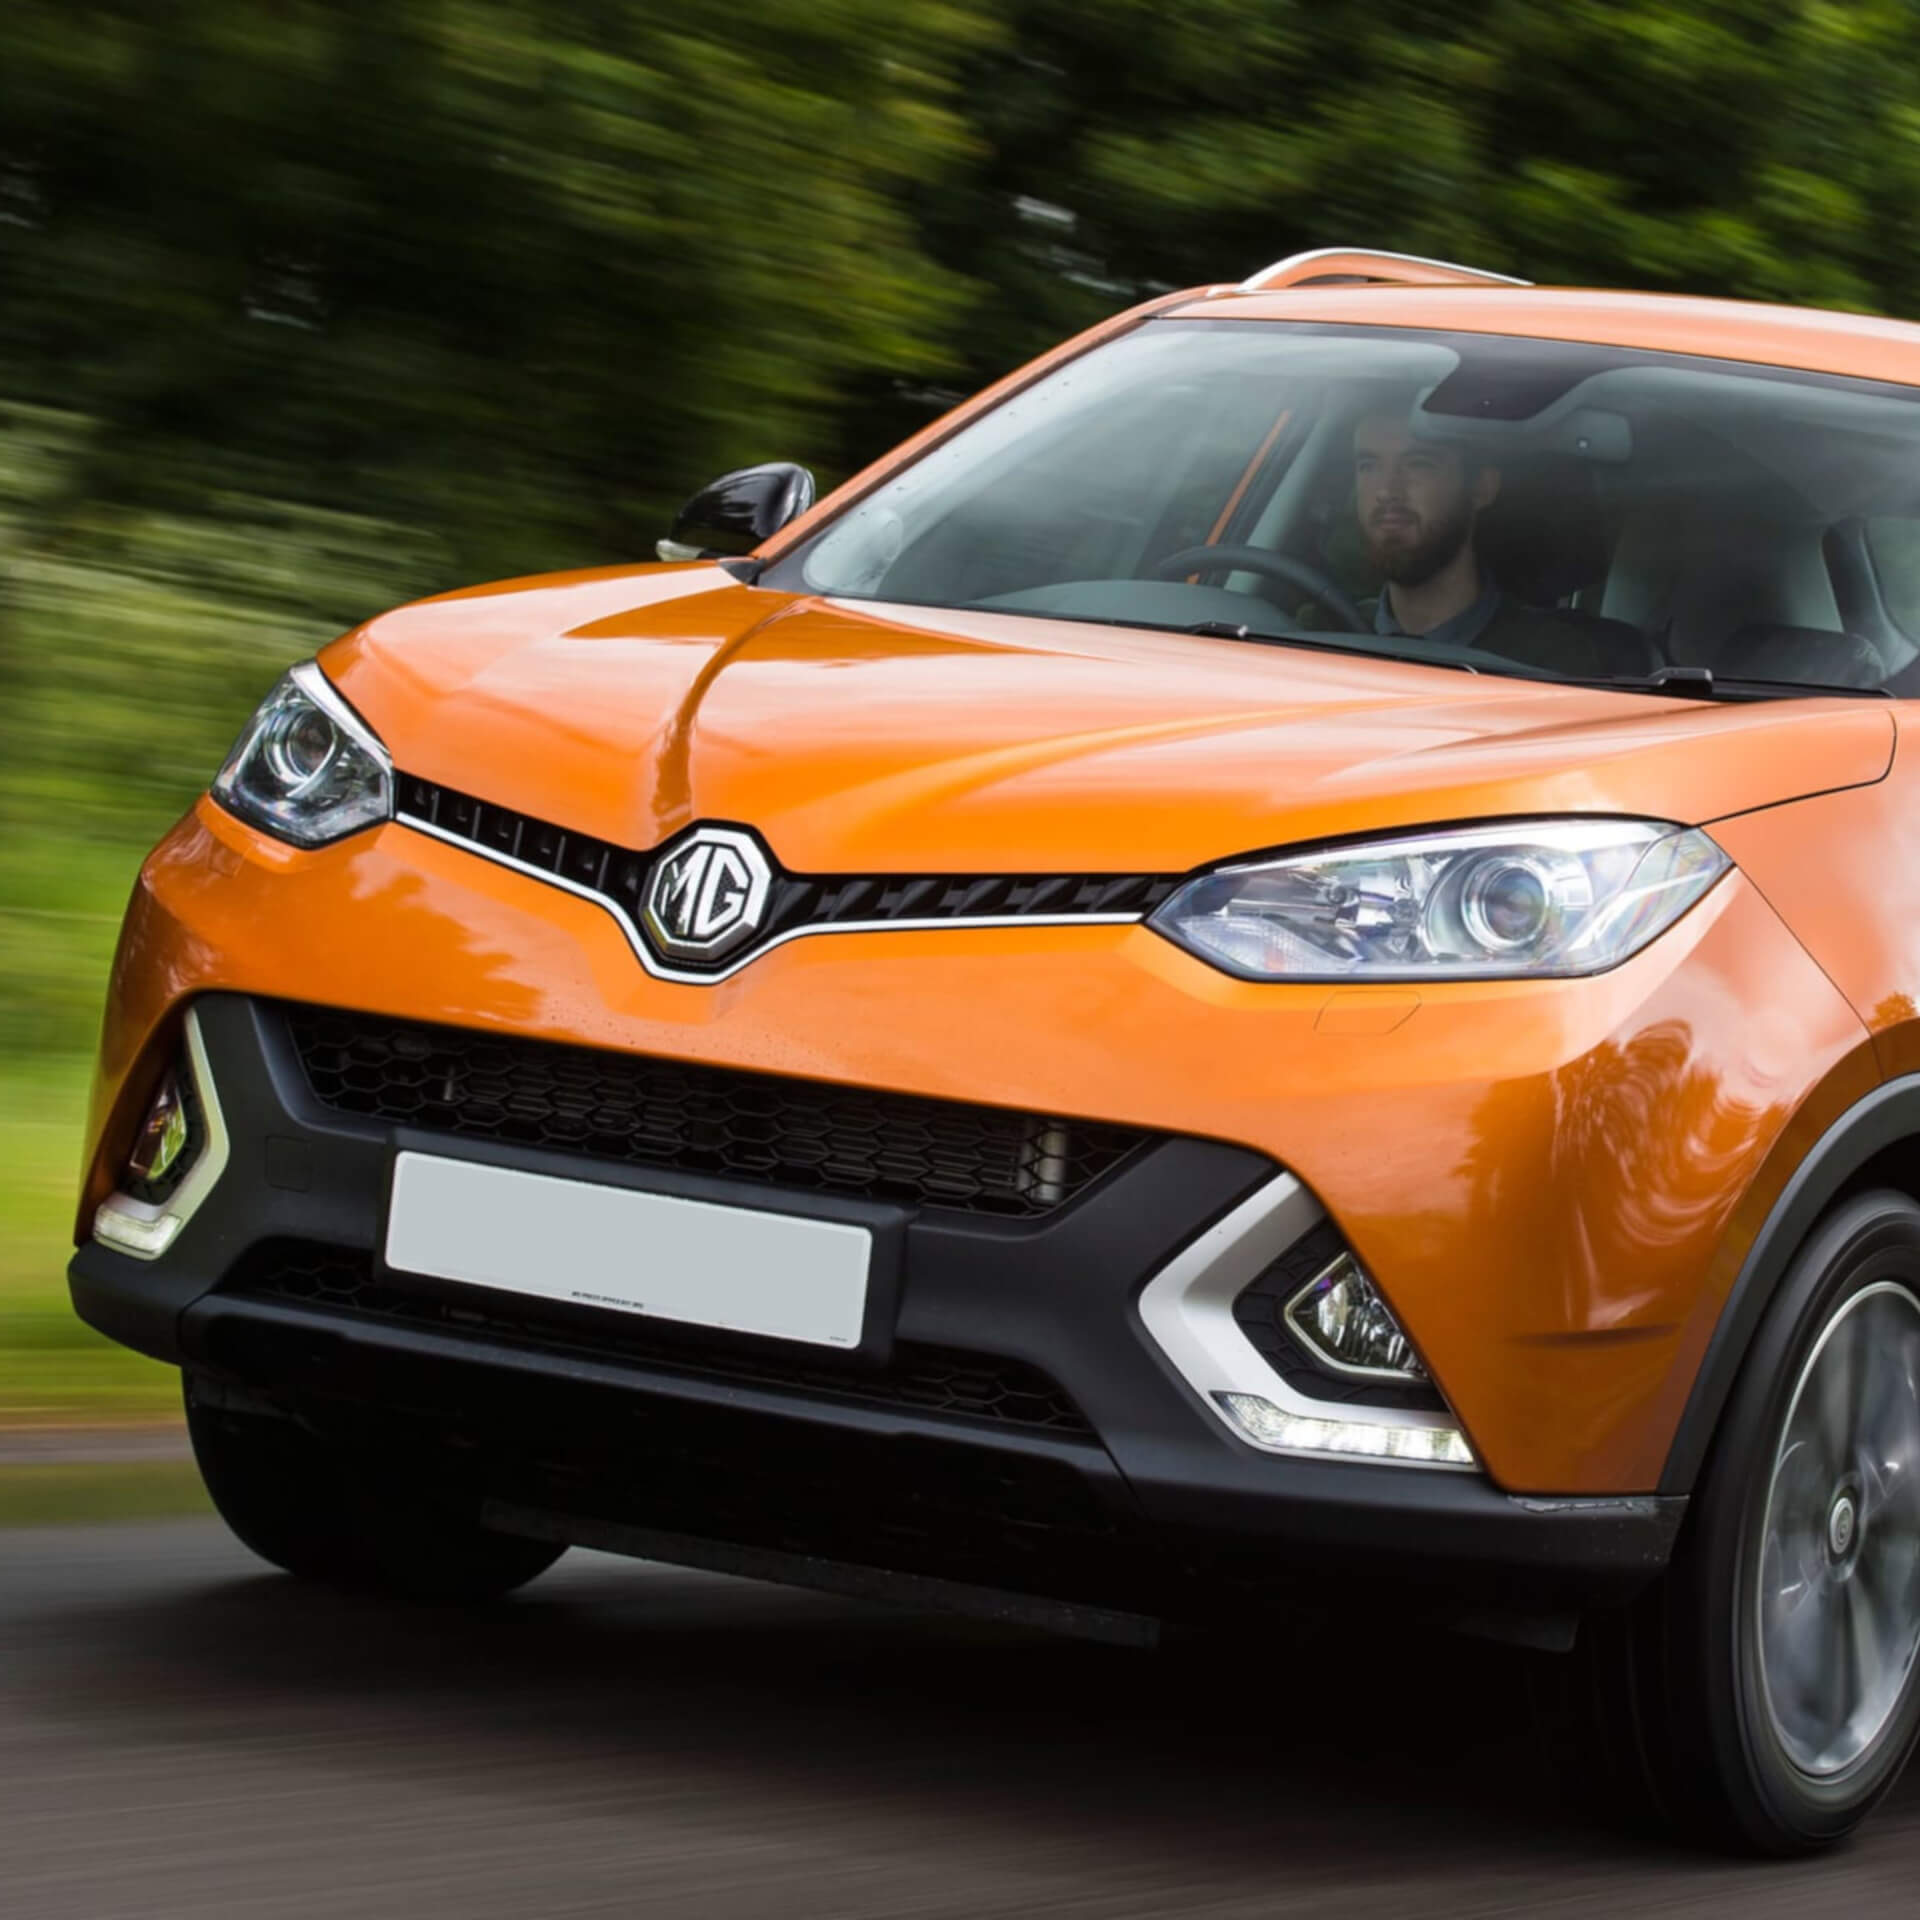 Direct4x4 accessories for MG GS vehicles with a photo of the front of a orange MG GS driving past greenery